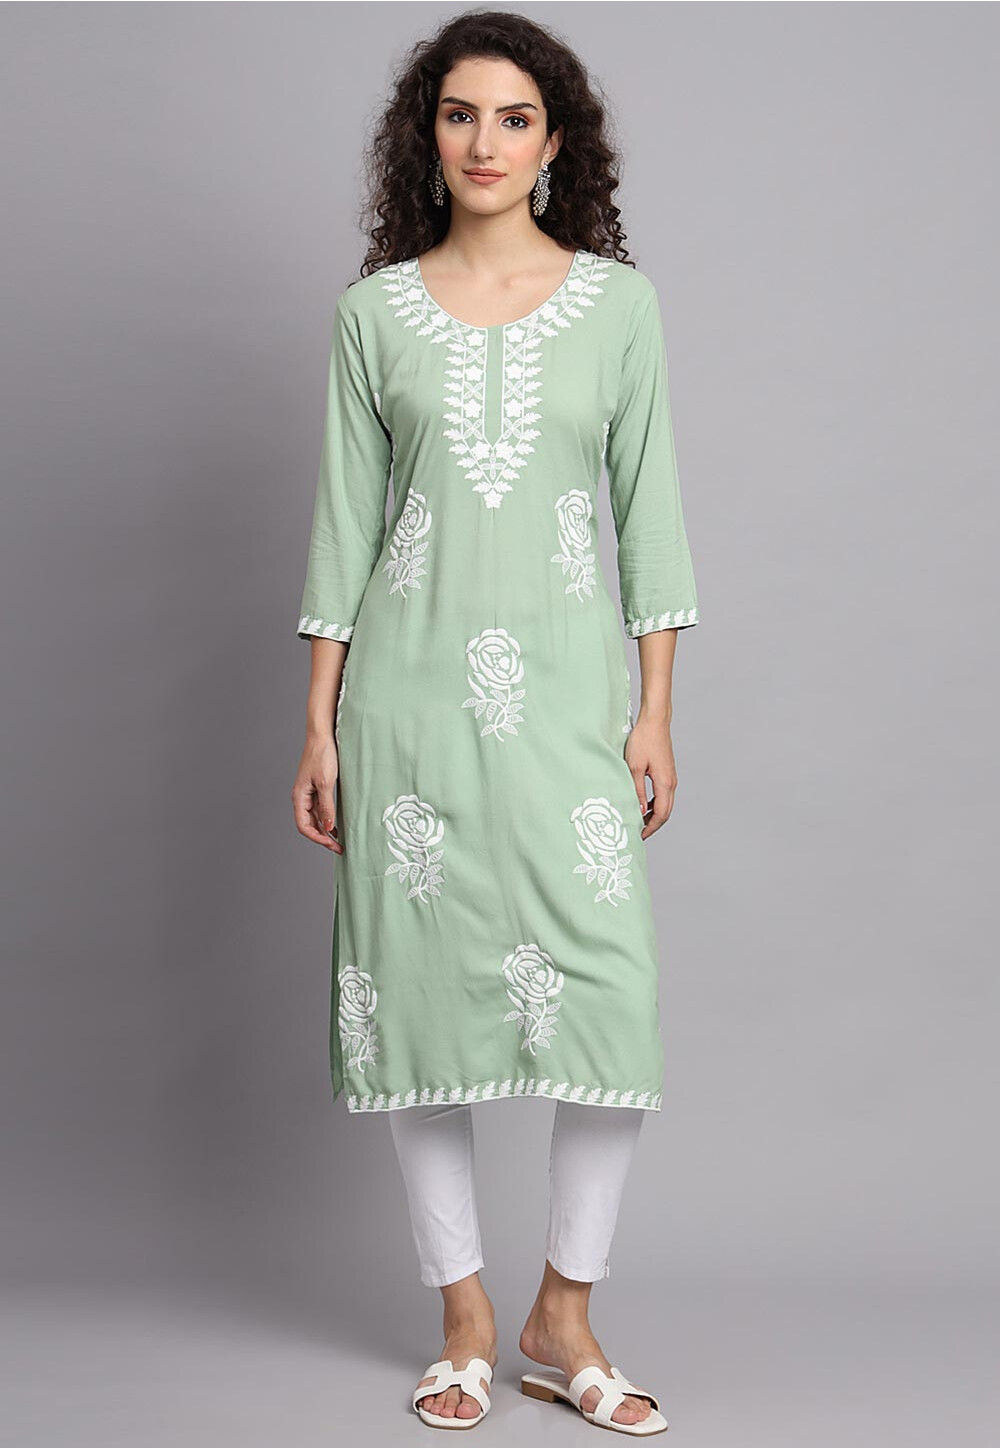 Rayon Embroidery Kurti In Pista Green Colour - KR5415755